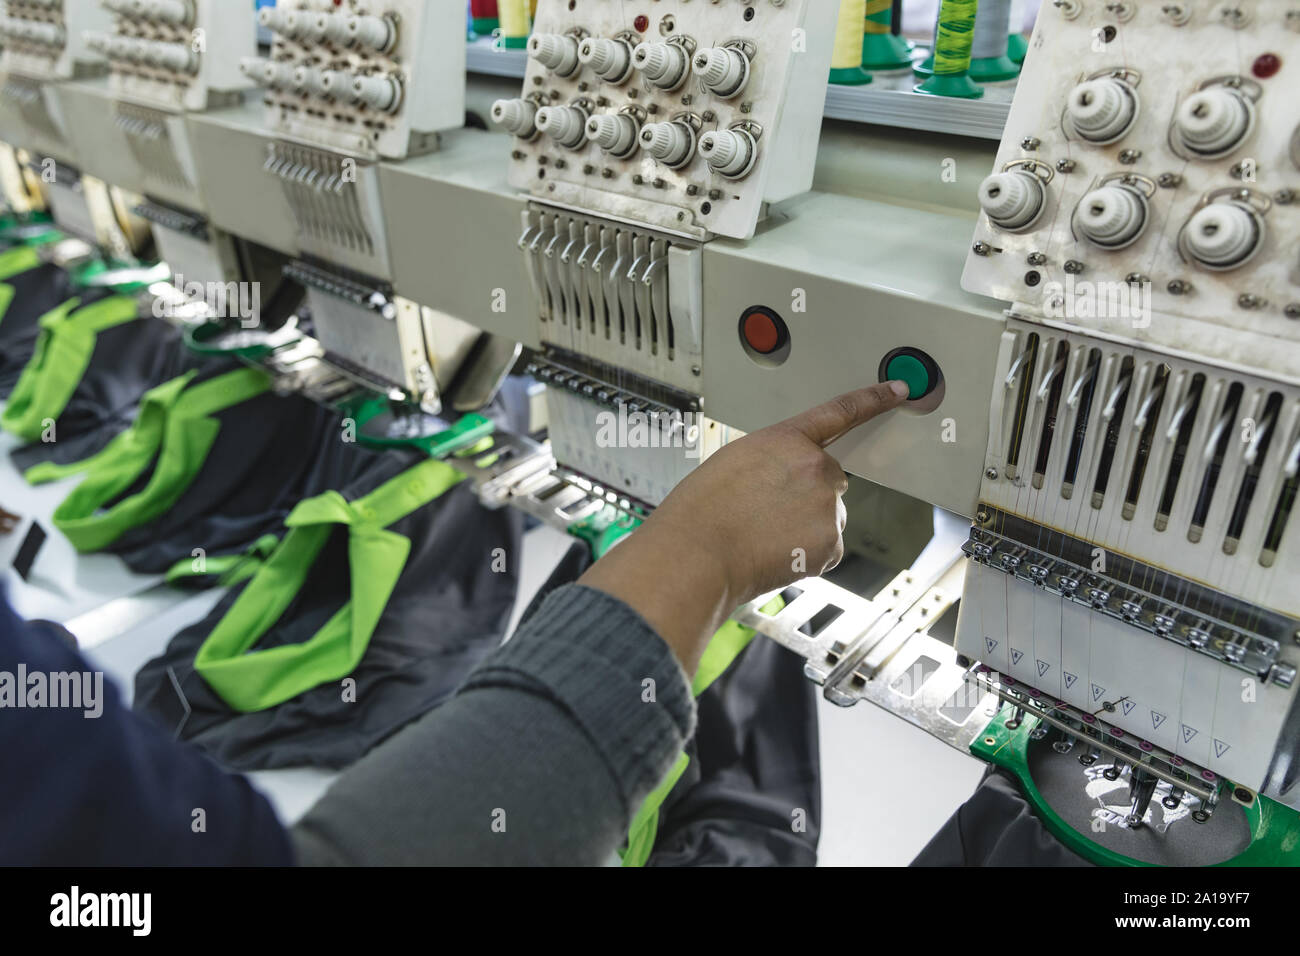 Woman operating a machine in a sports clothing factory Stock Photo